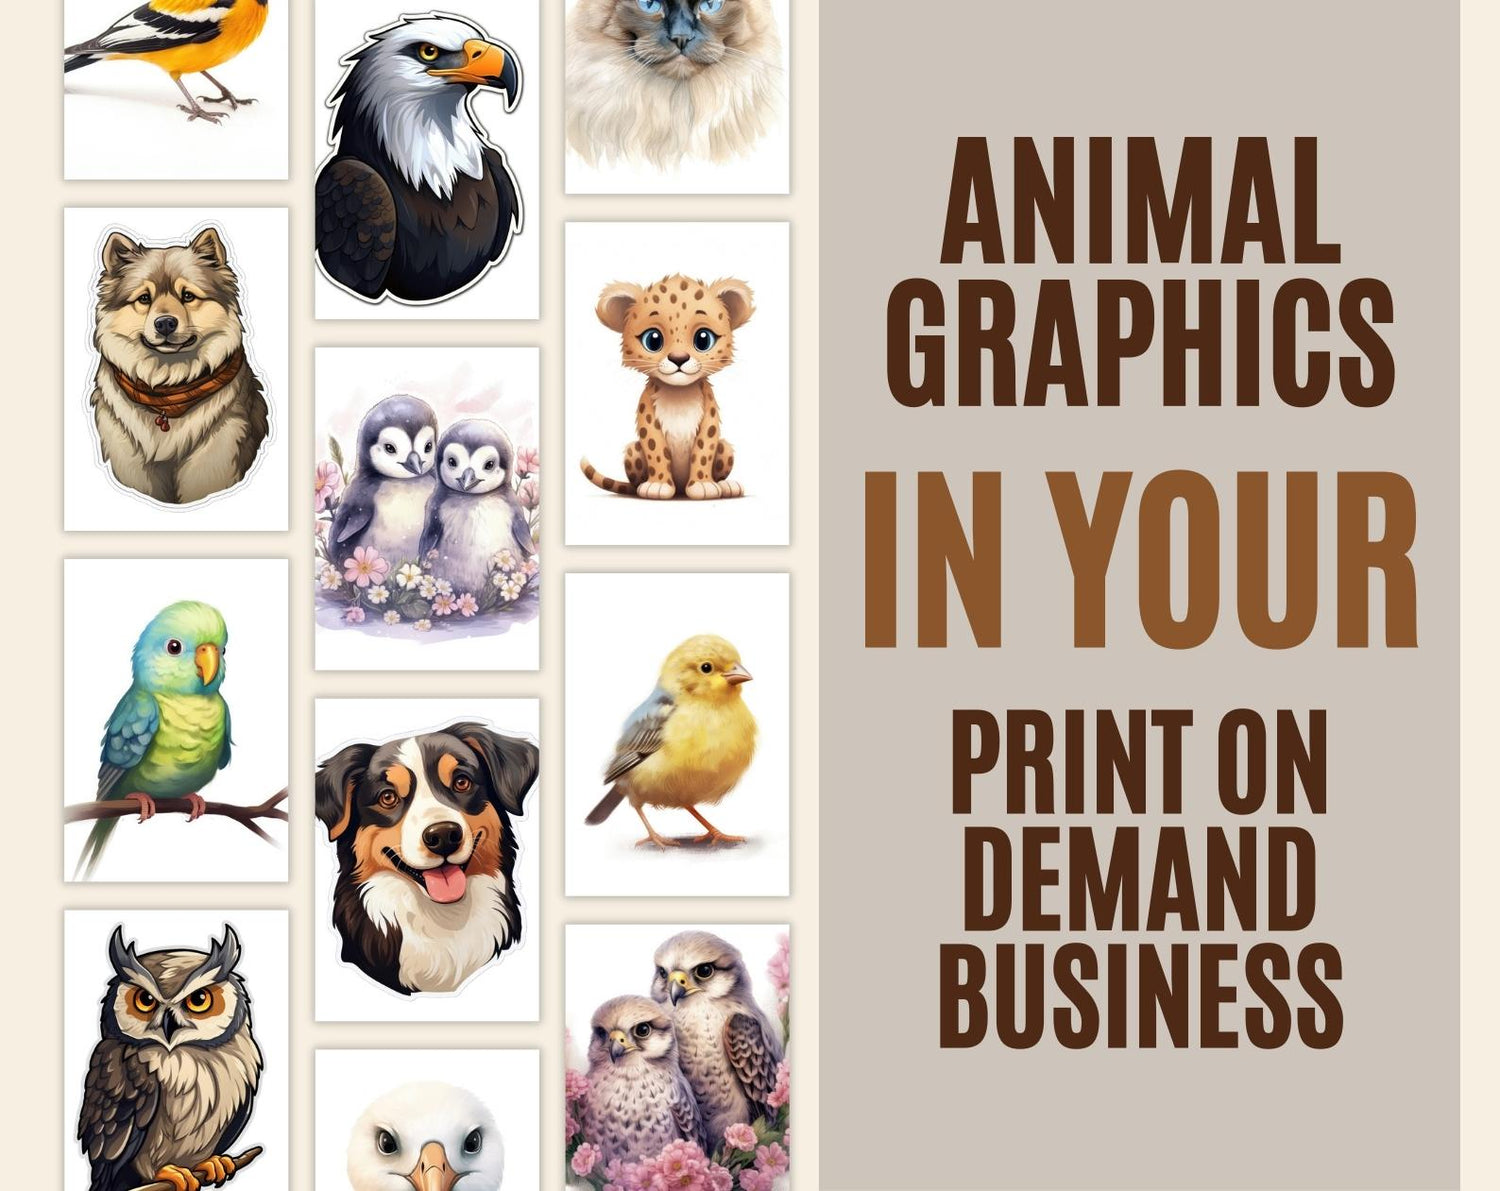 Why Should You Leverage Animal Graphics in Your Print on Demand Business?